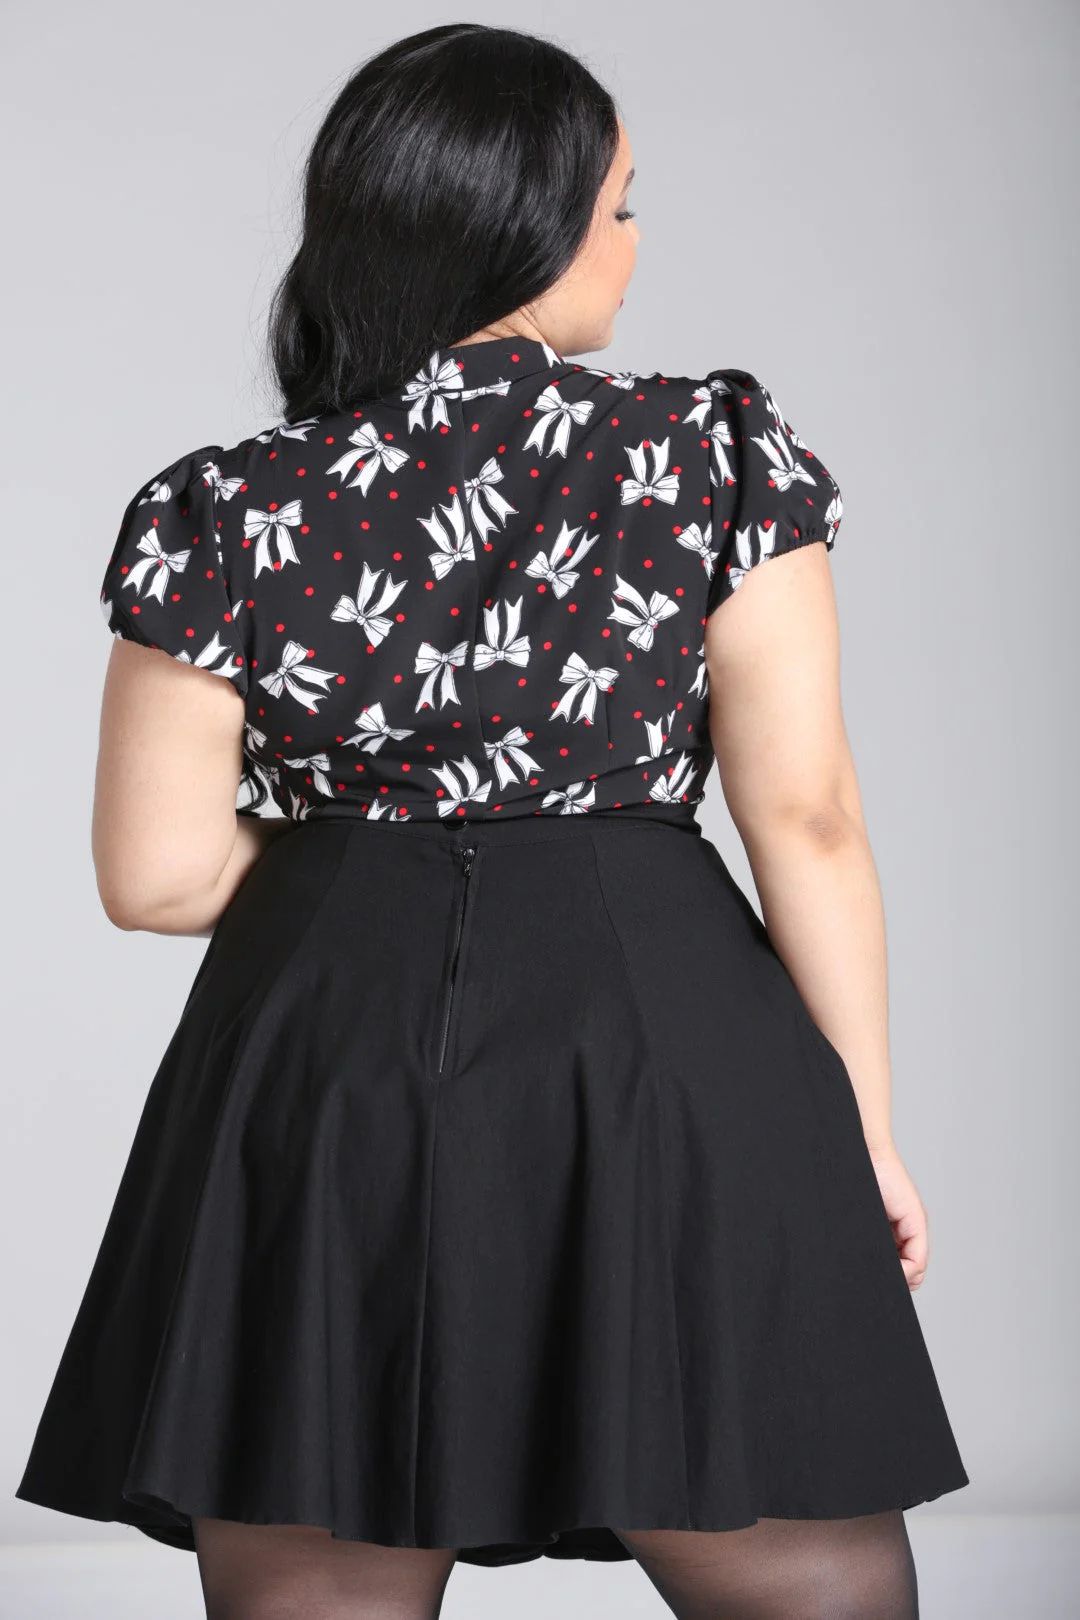 PS60270bbbb-chemisier-blouse-pin-up-rockabilly-50-s-retro-hell-bunny-bobbie